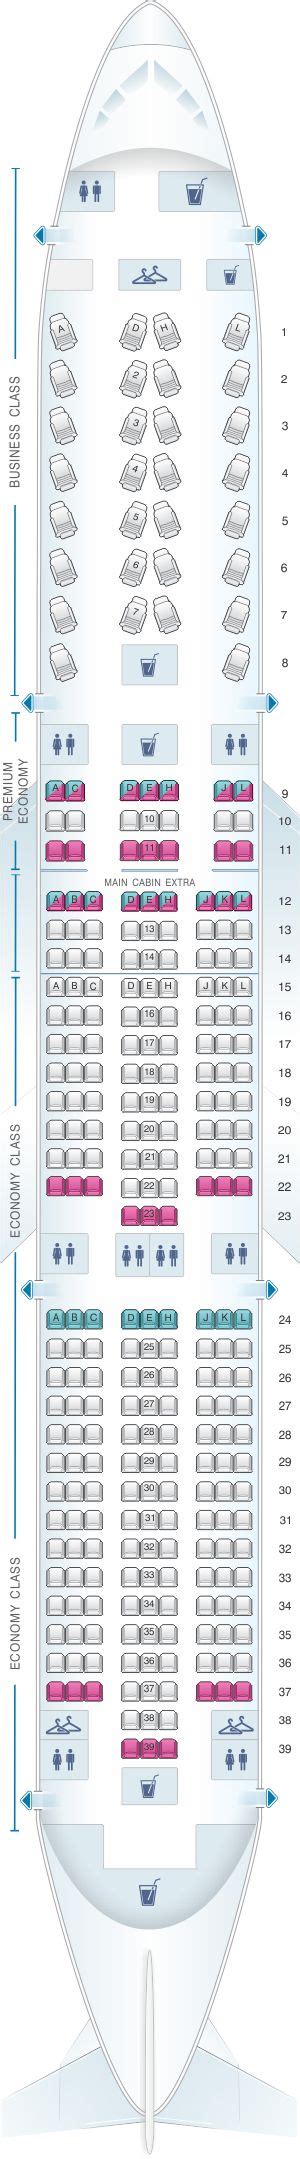 Seat Map American Airlines Boeing B Asiana Airlines American